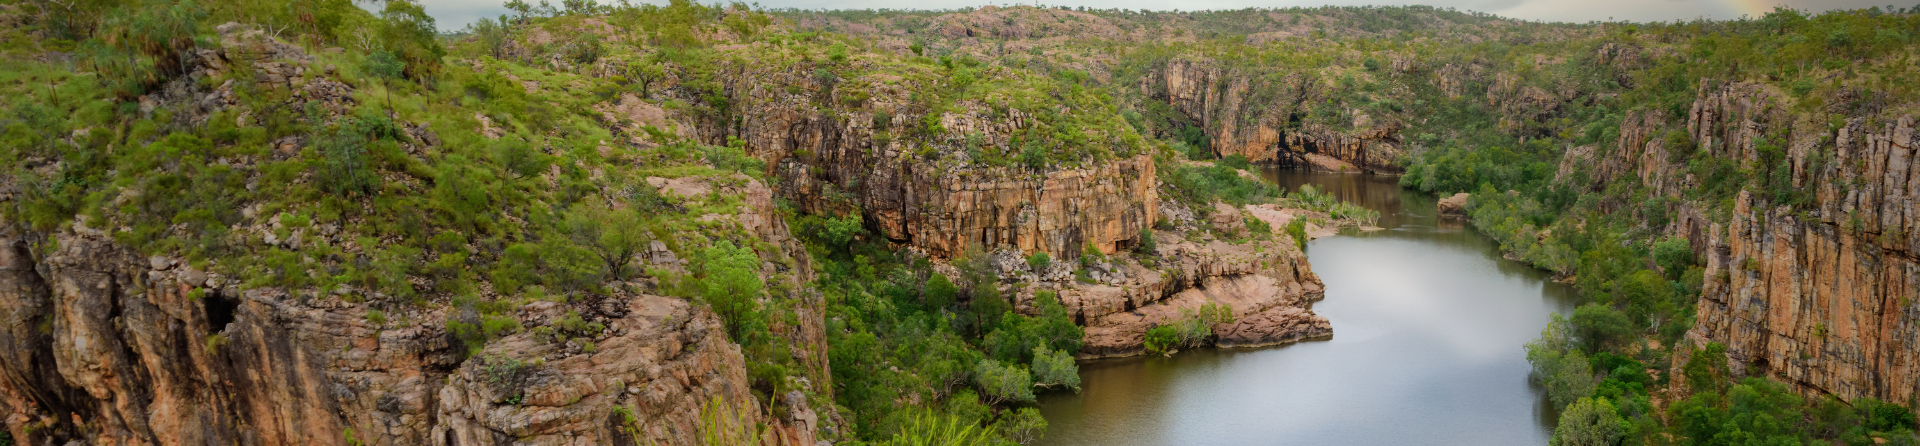 Is it worth going to Katherine Gorge?